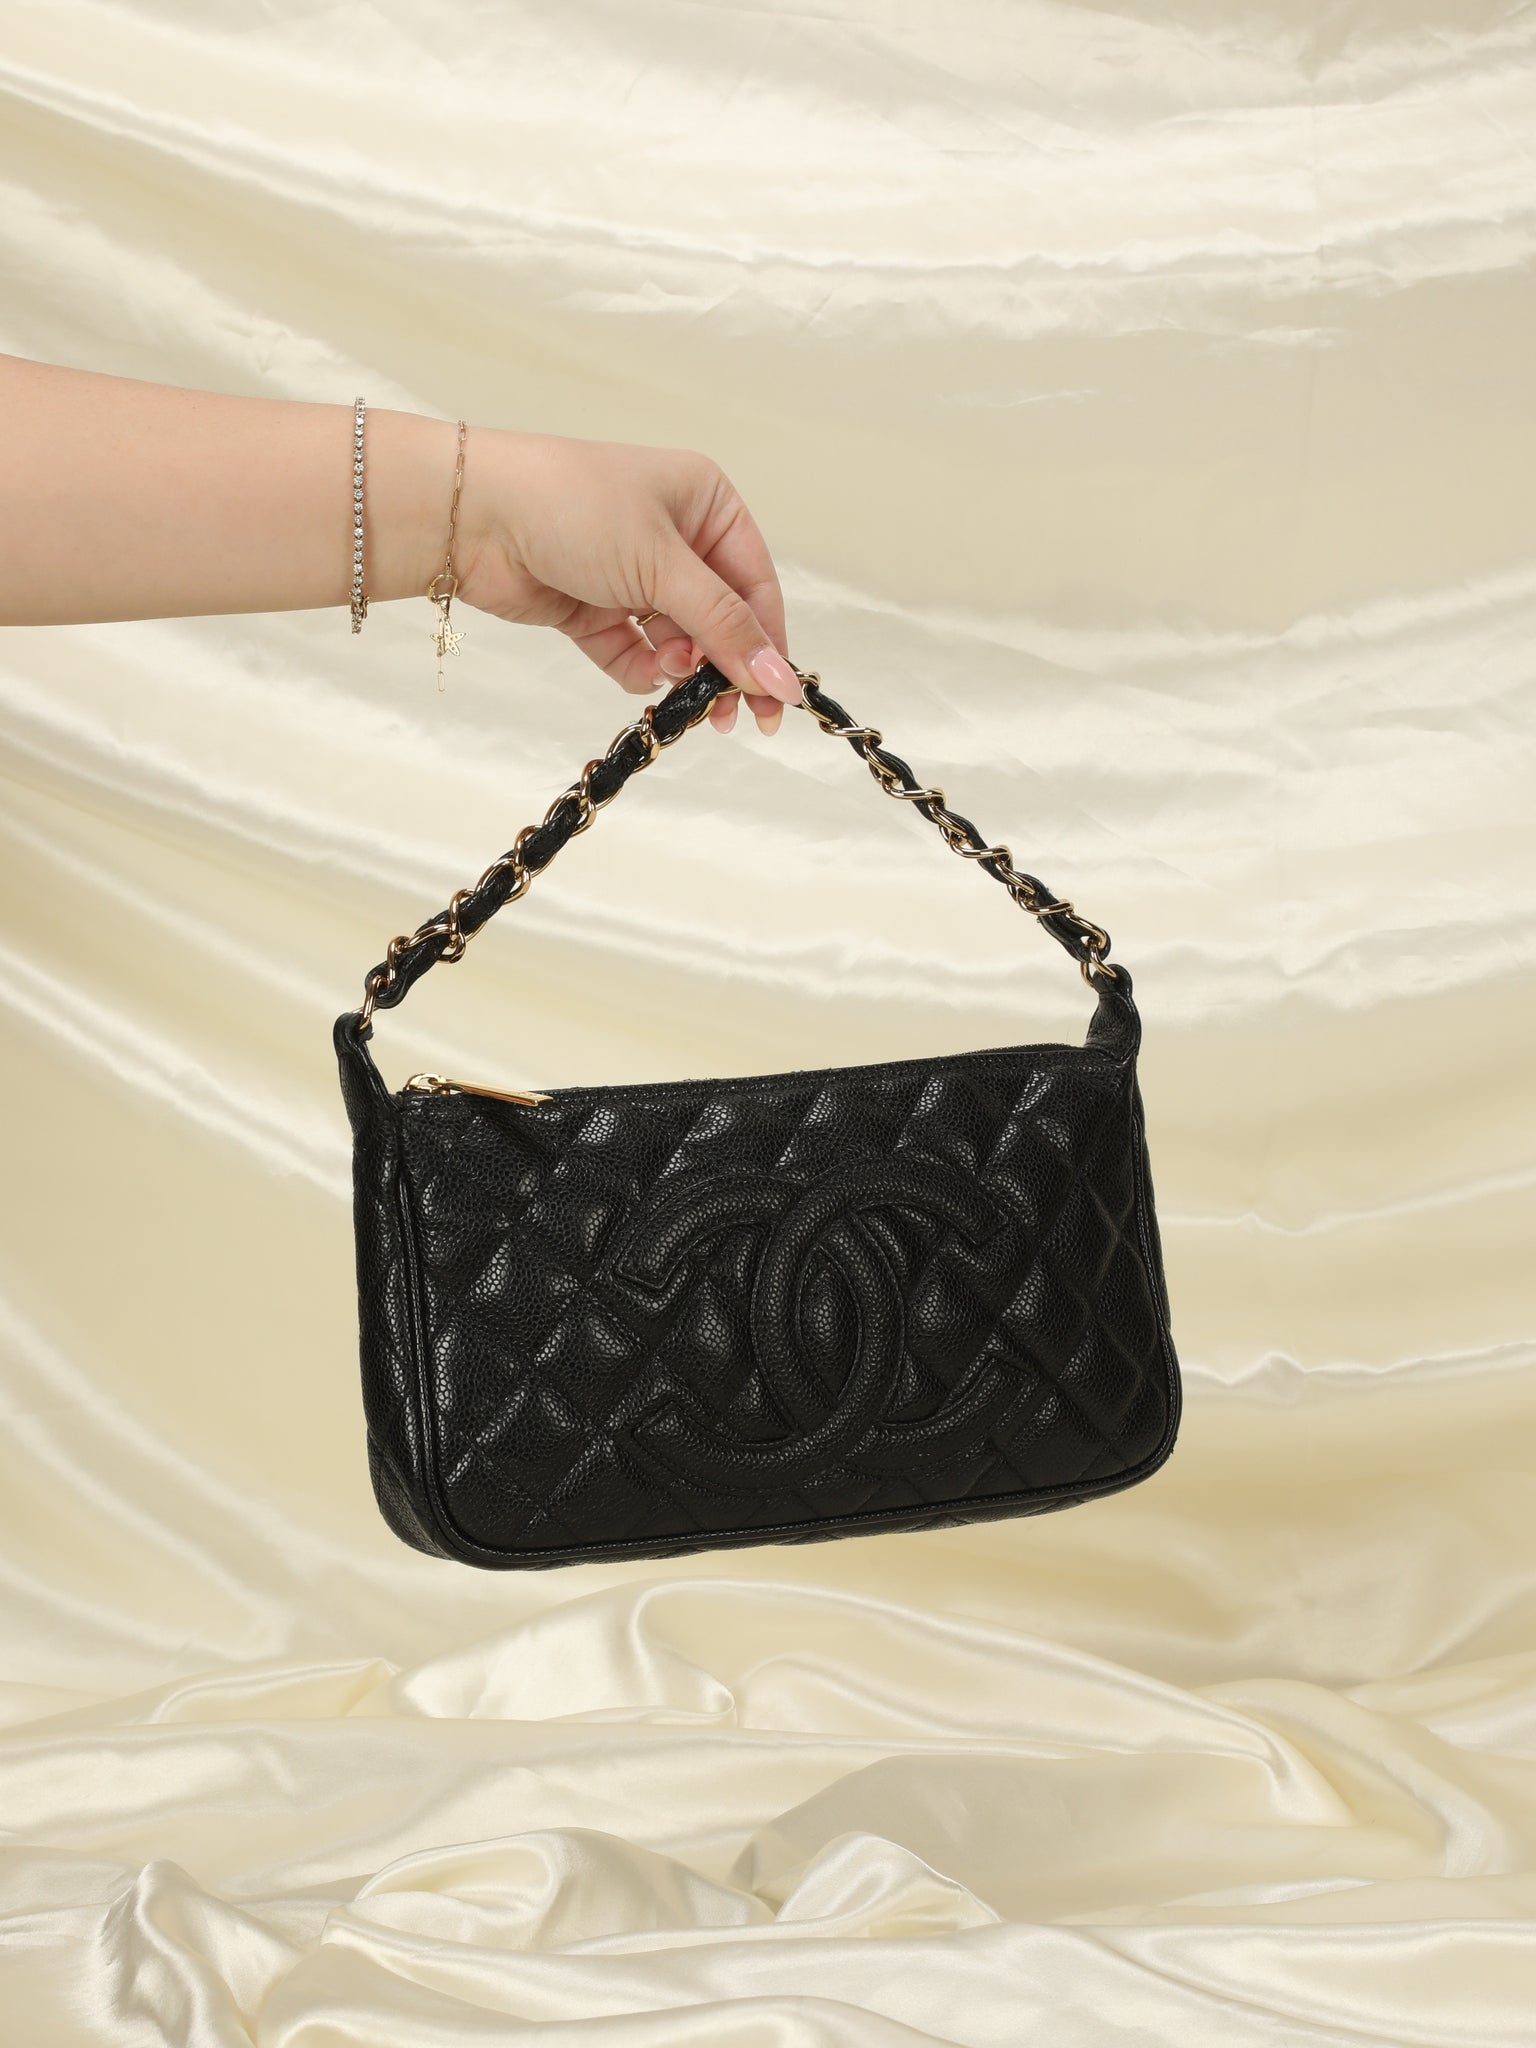 CHANEL CC Quilted Caviar Shoulder Bag in Black 2003 - 2004